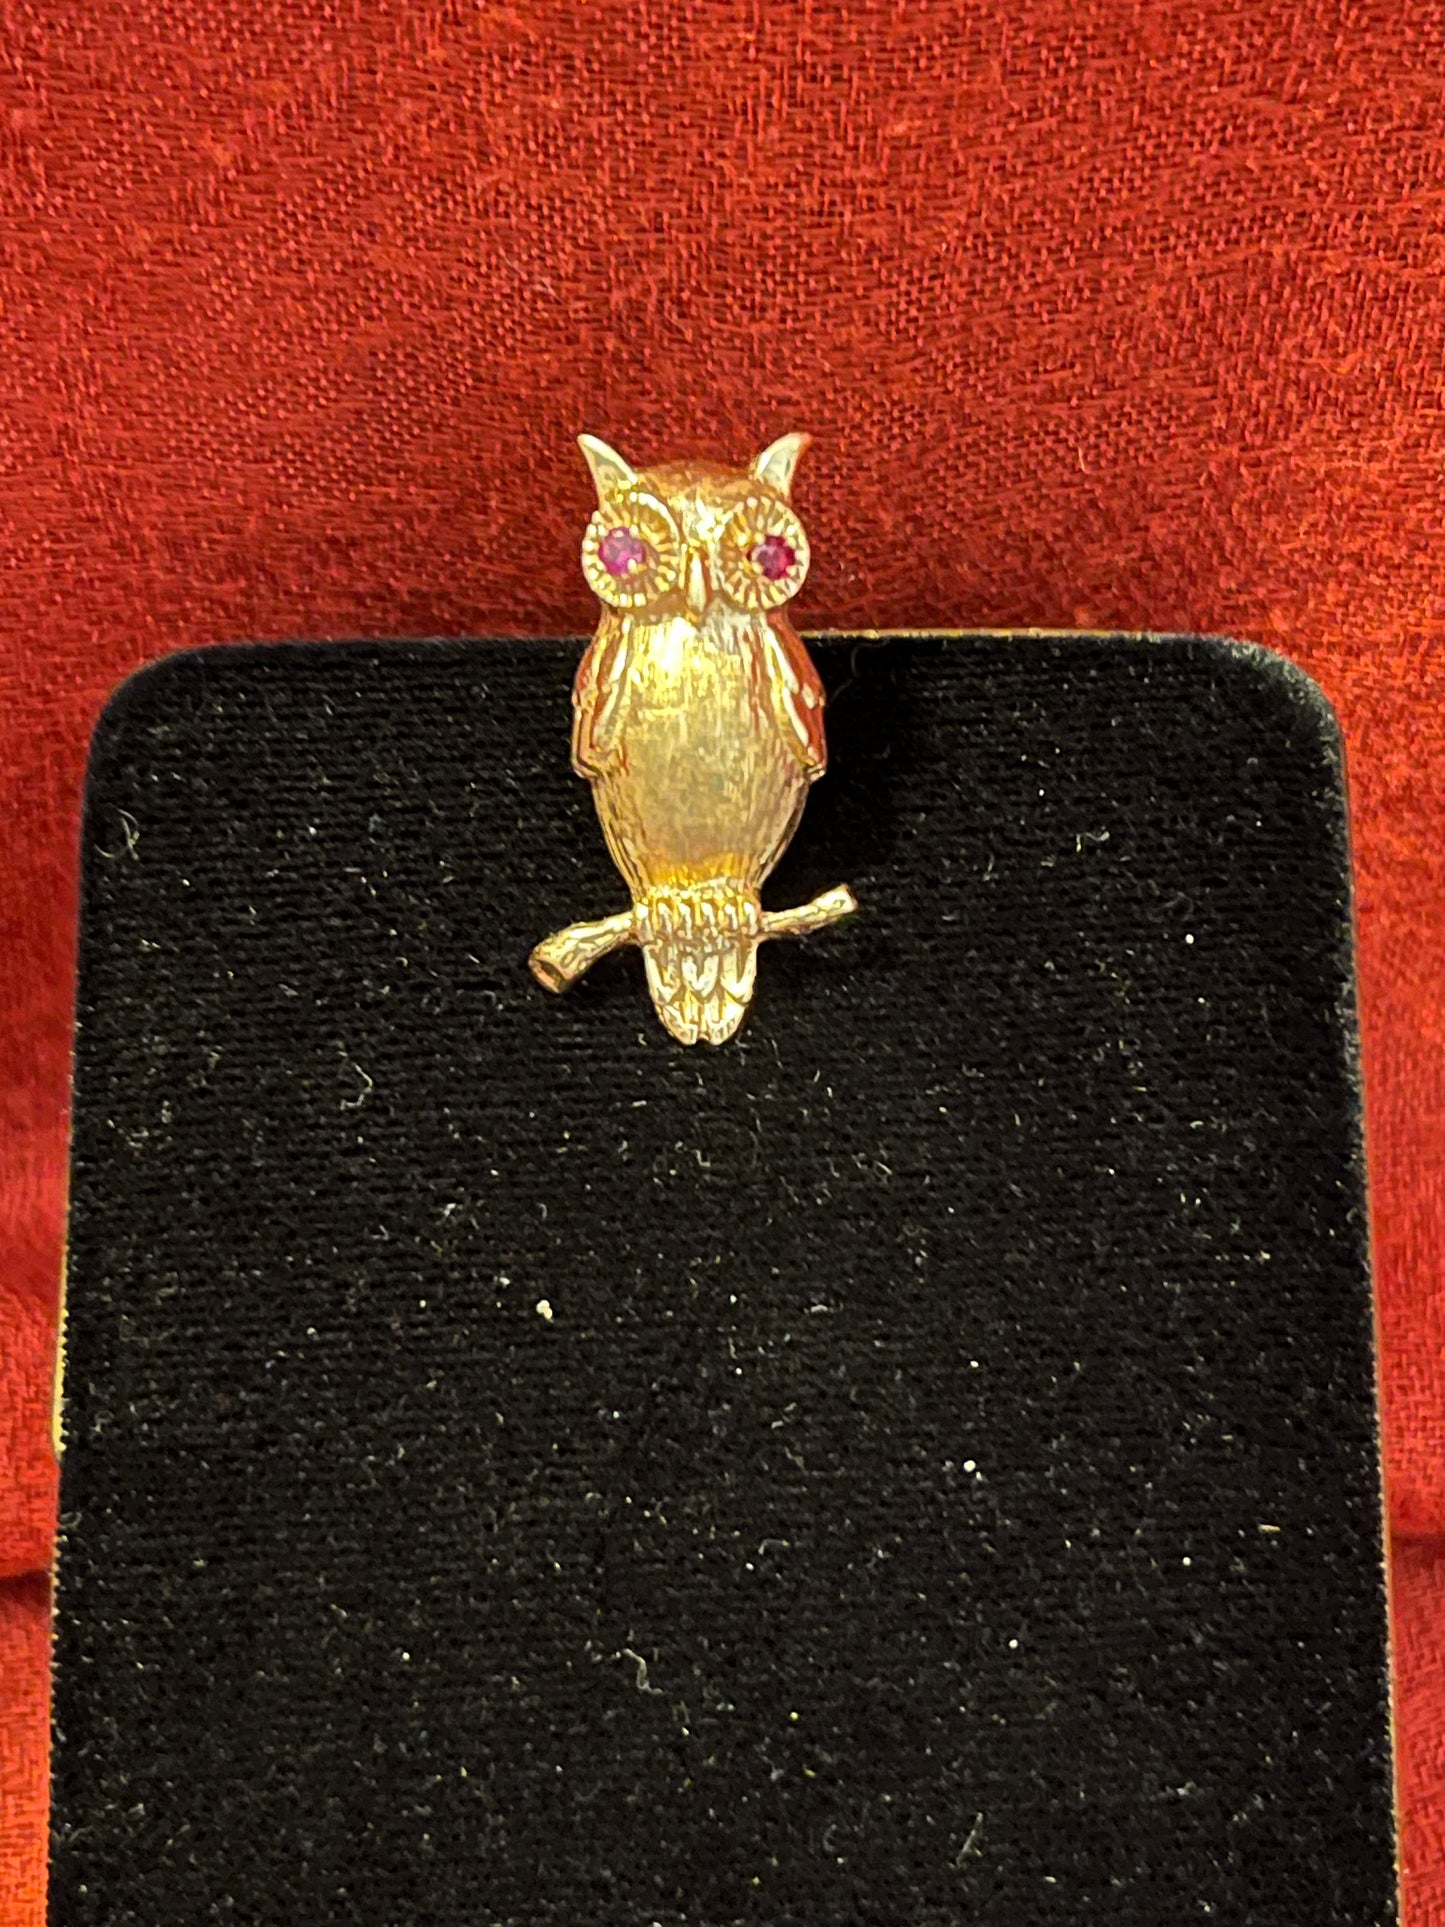 Vintage 14KT Gold and Ruby Owl Brooch